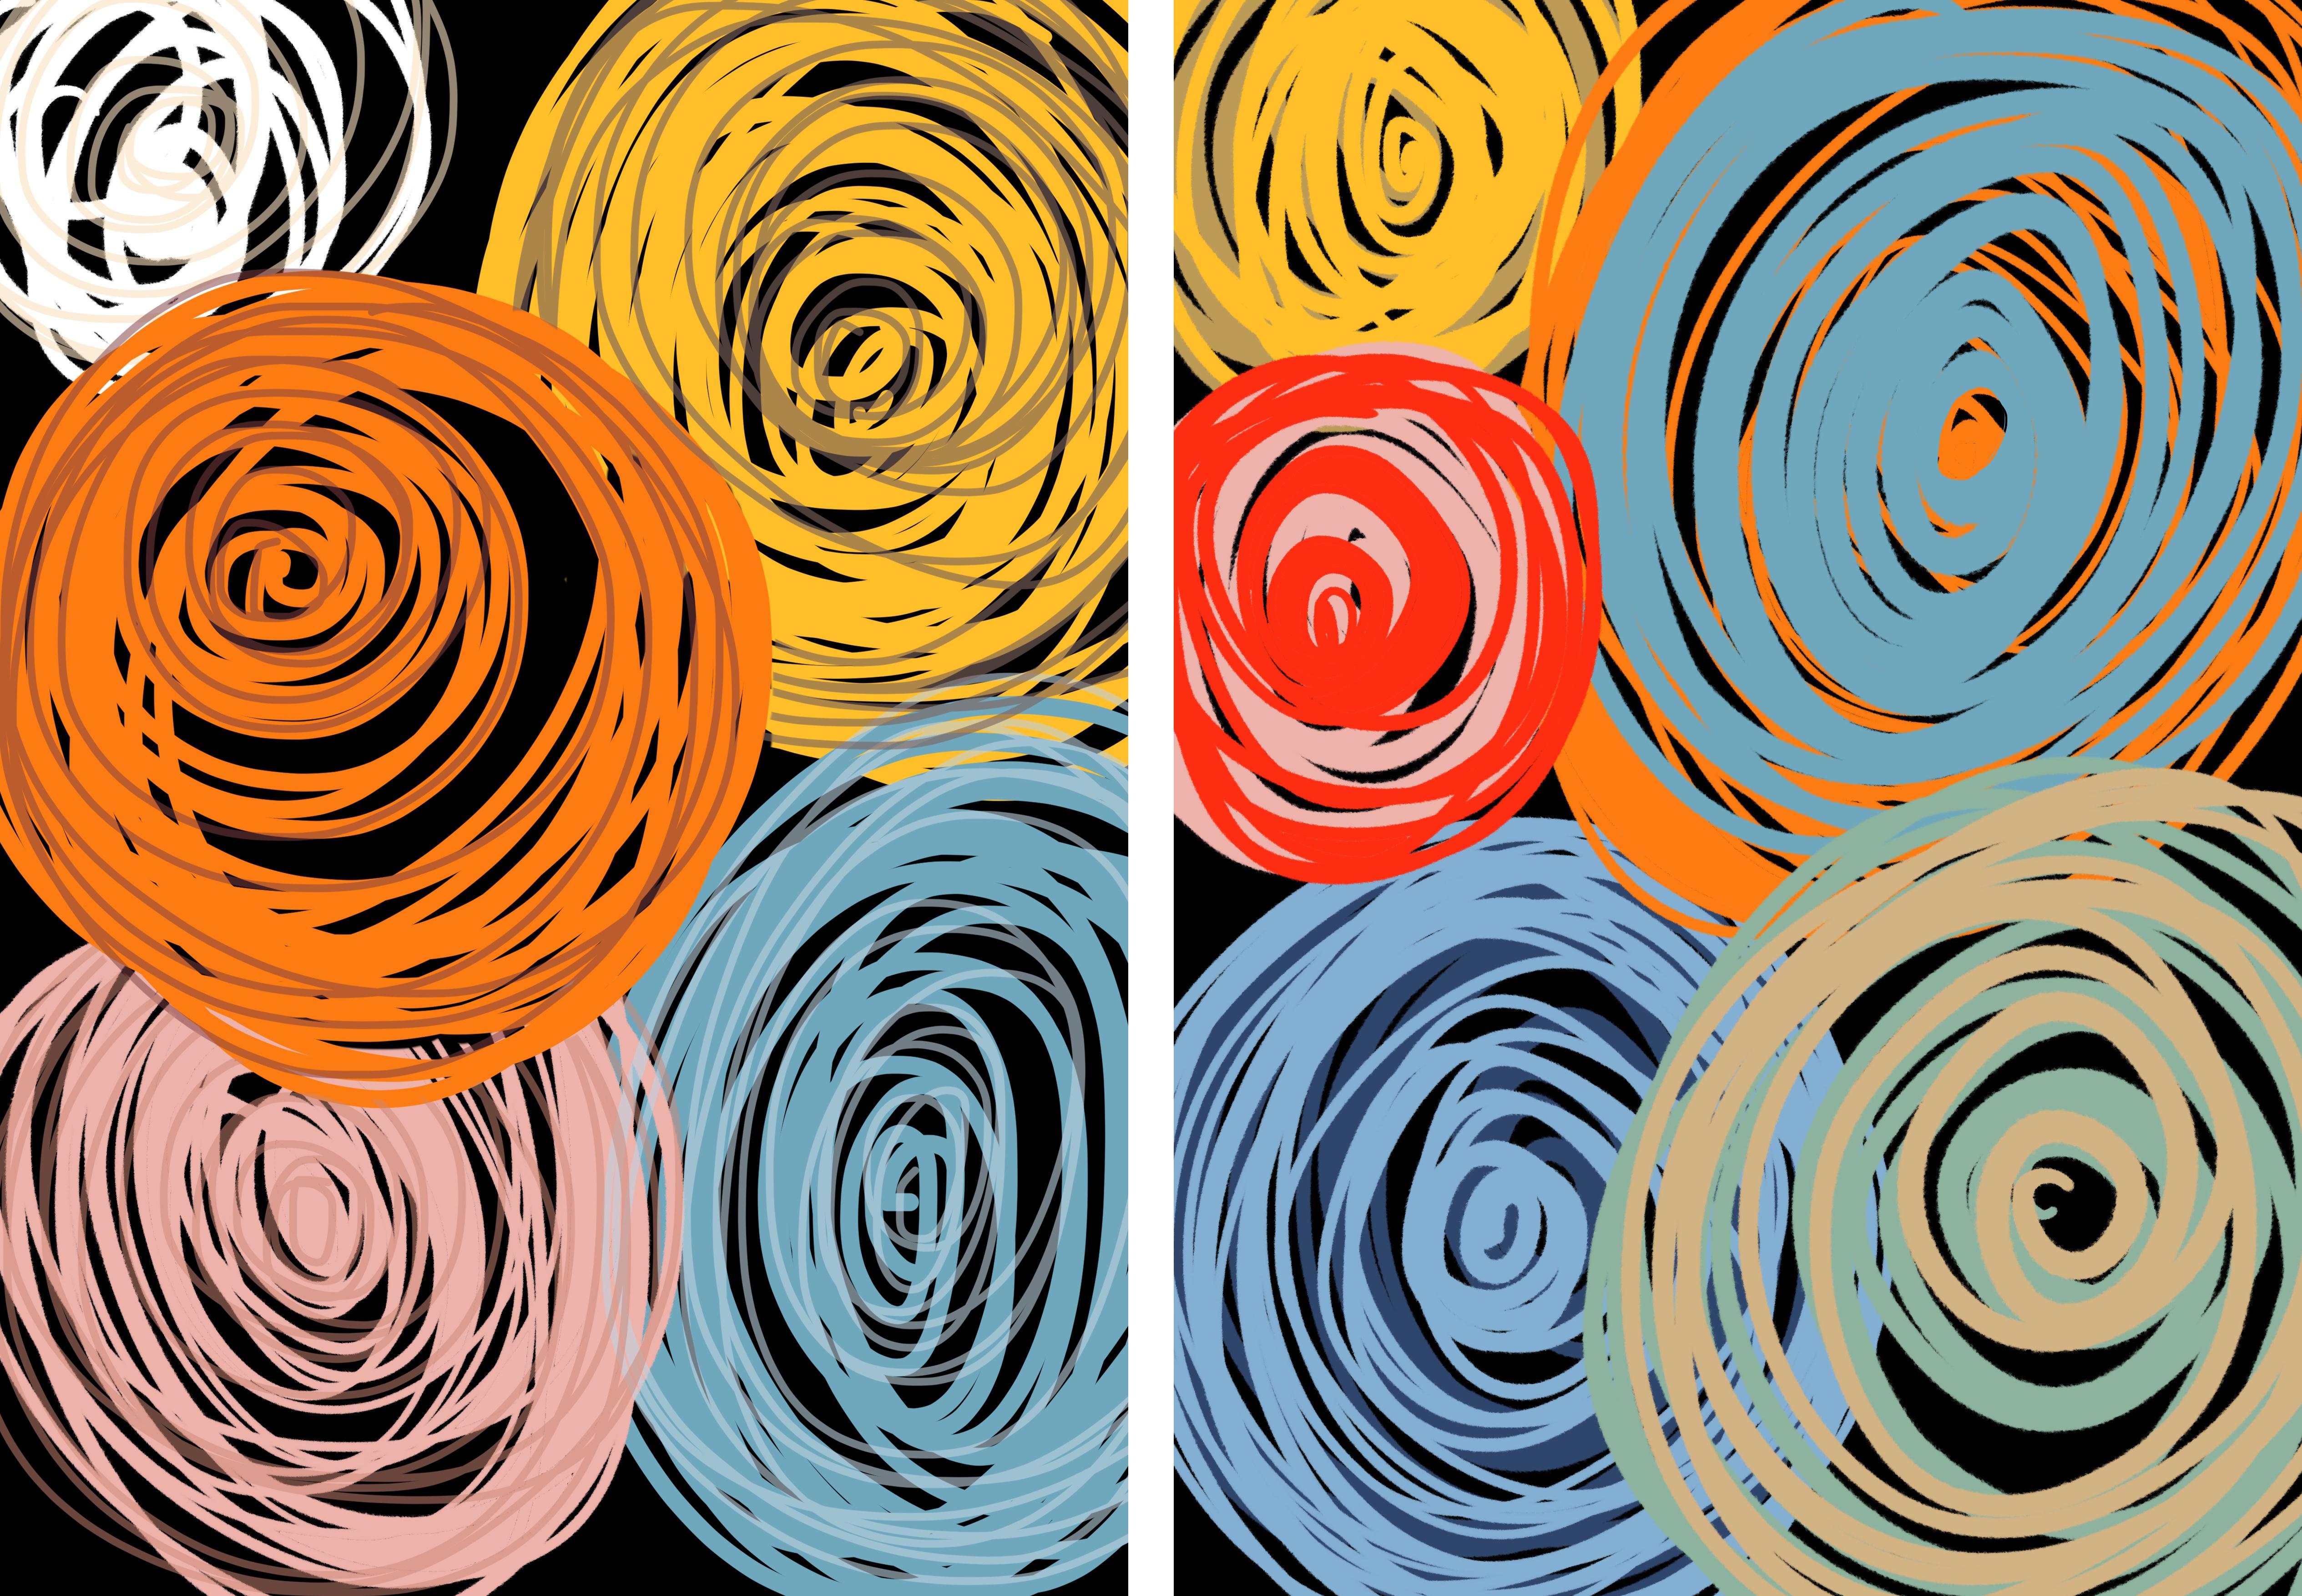 Singularity 02 and 03, Diptych. Abstract color photographs